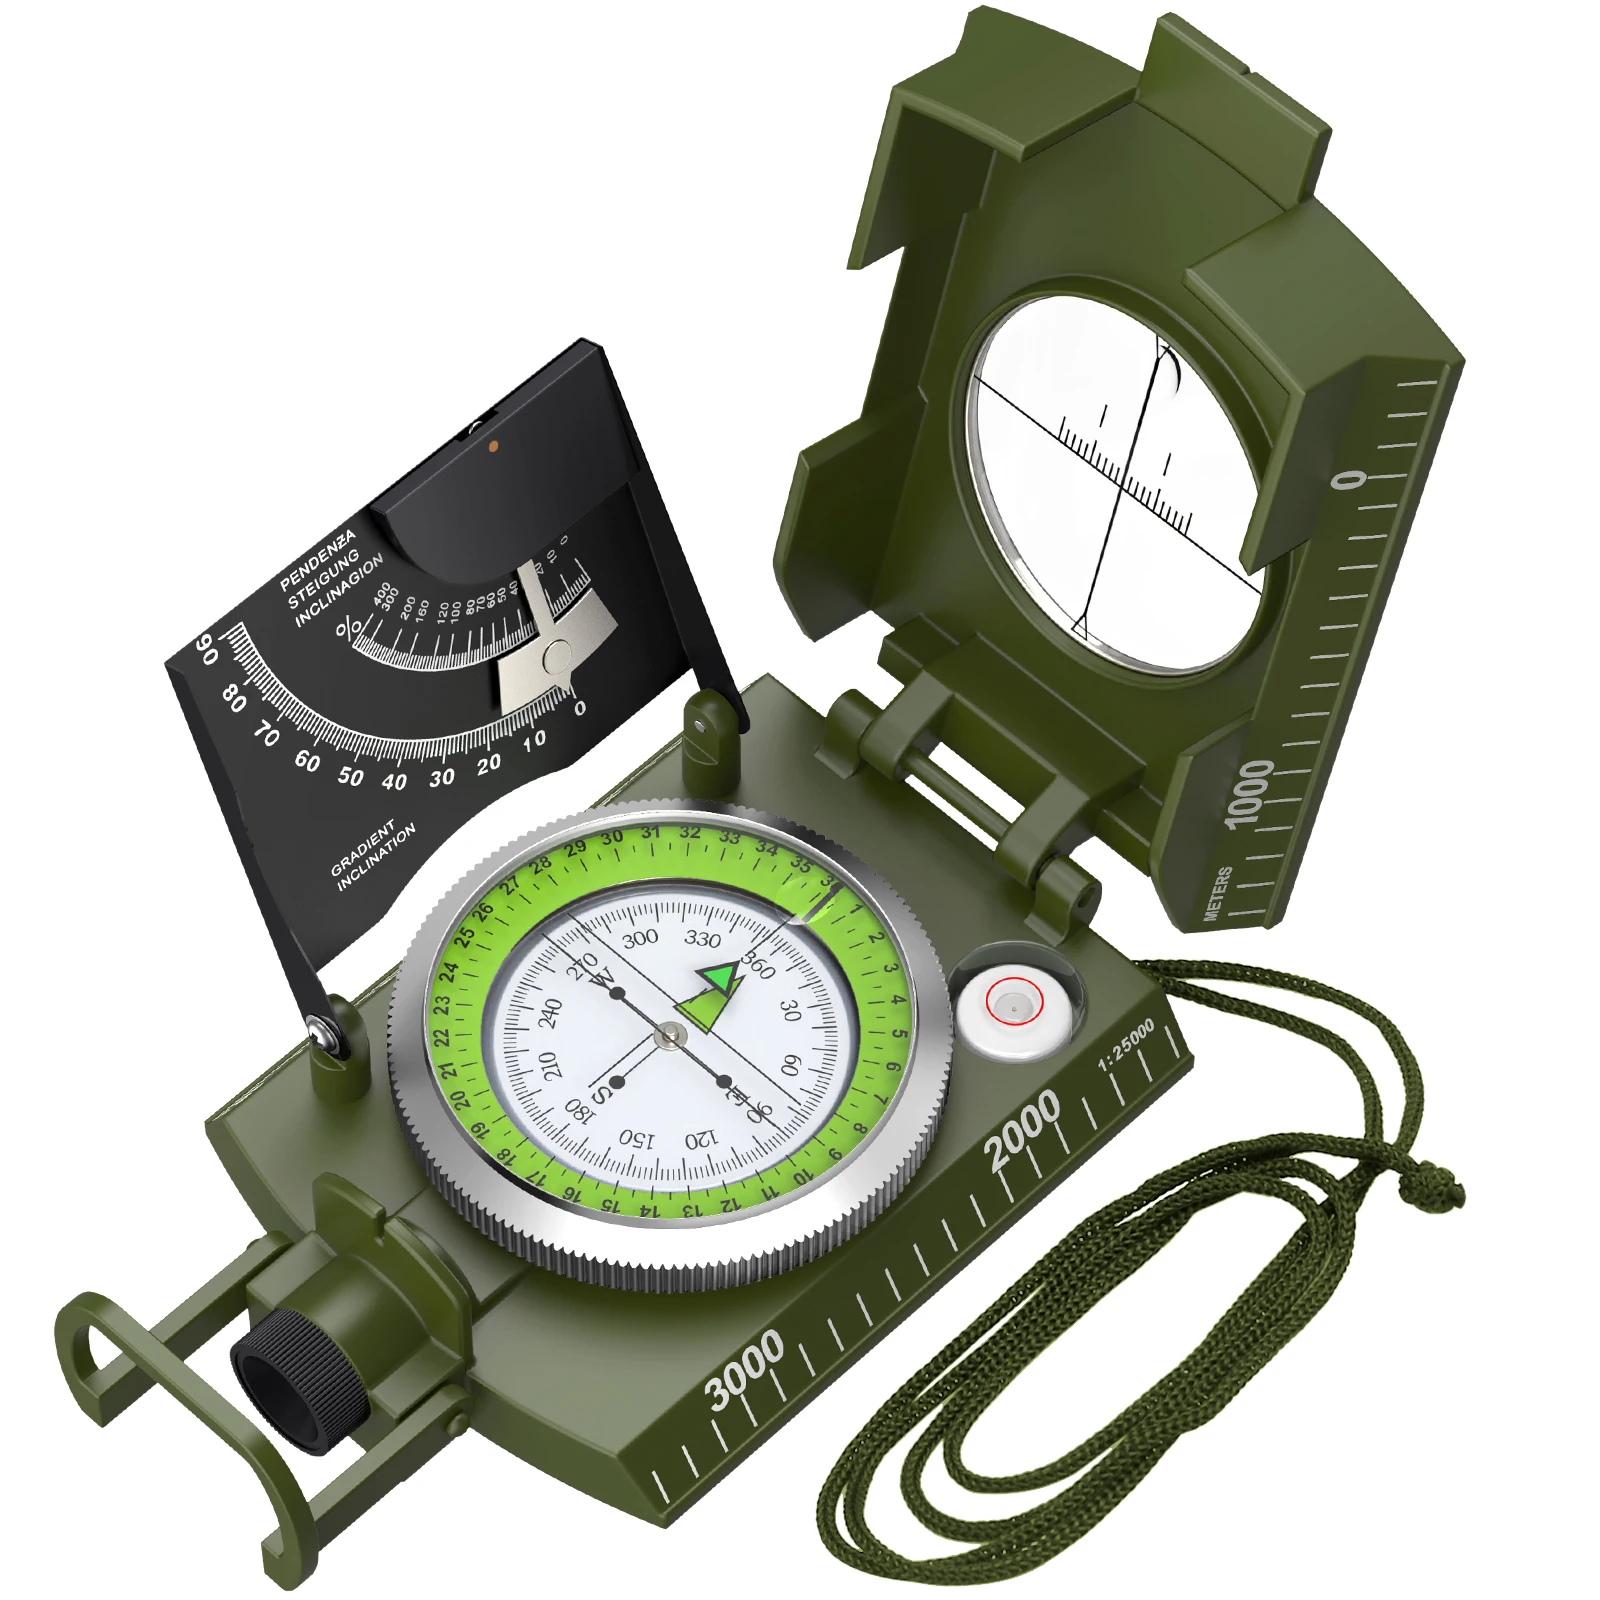 Professional Compass Metal Compass Sighting Clinometer Waterproof IP65 with Carry Bag for Camping Hunting Hiking Outdoor Tools